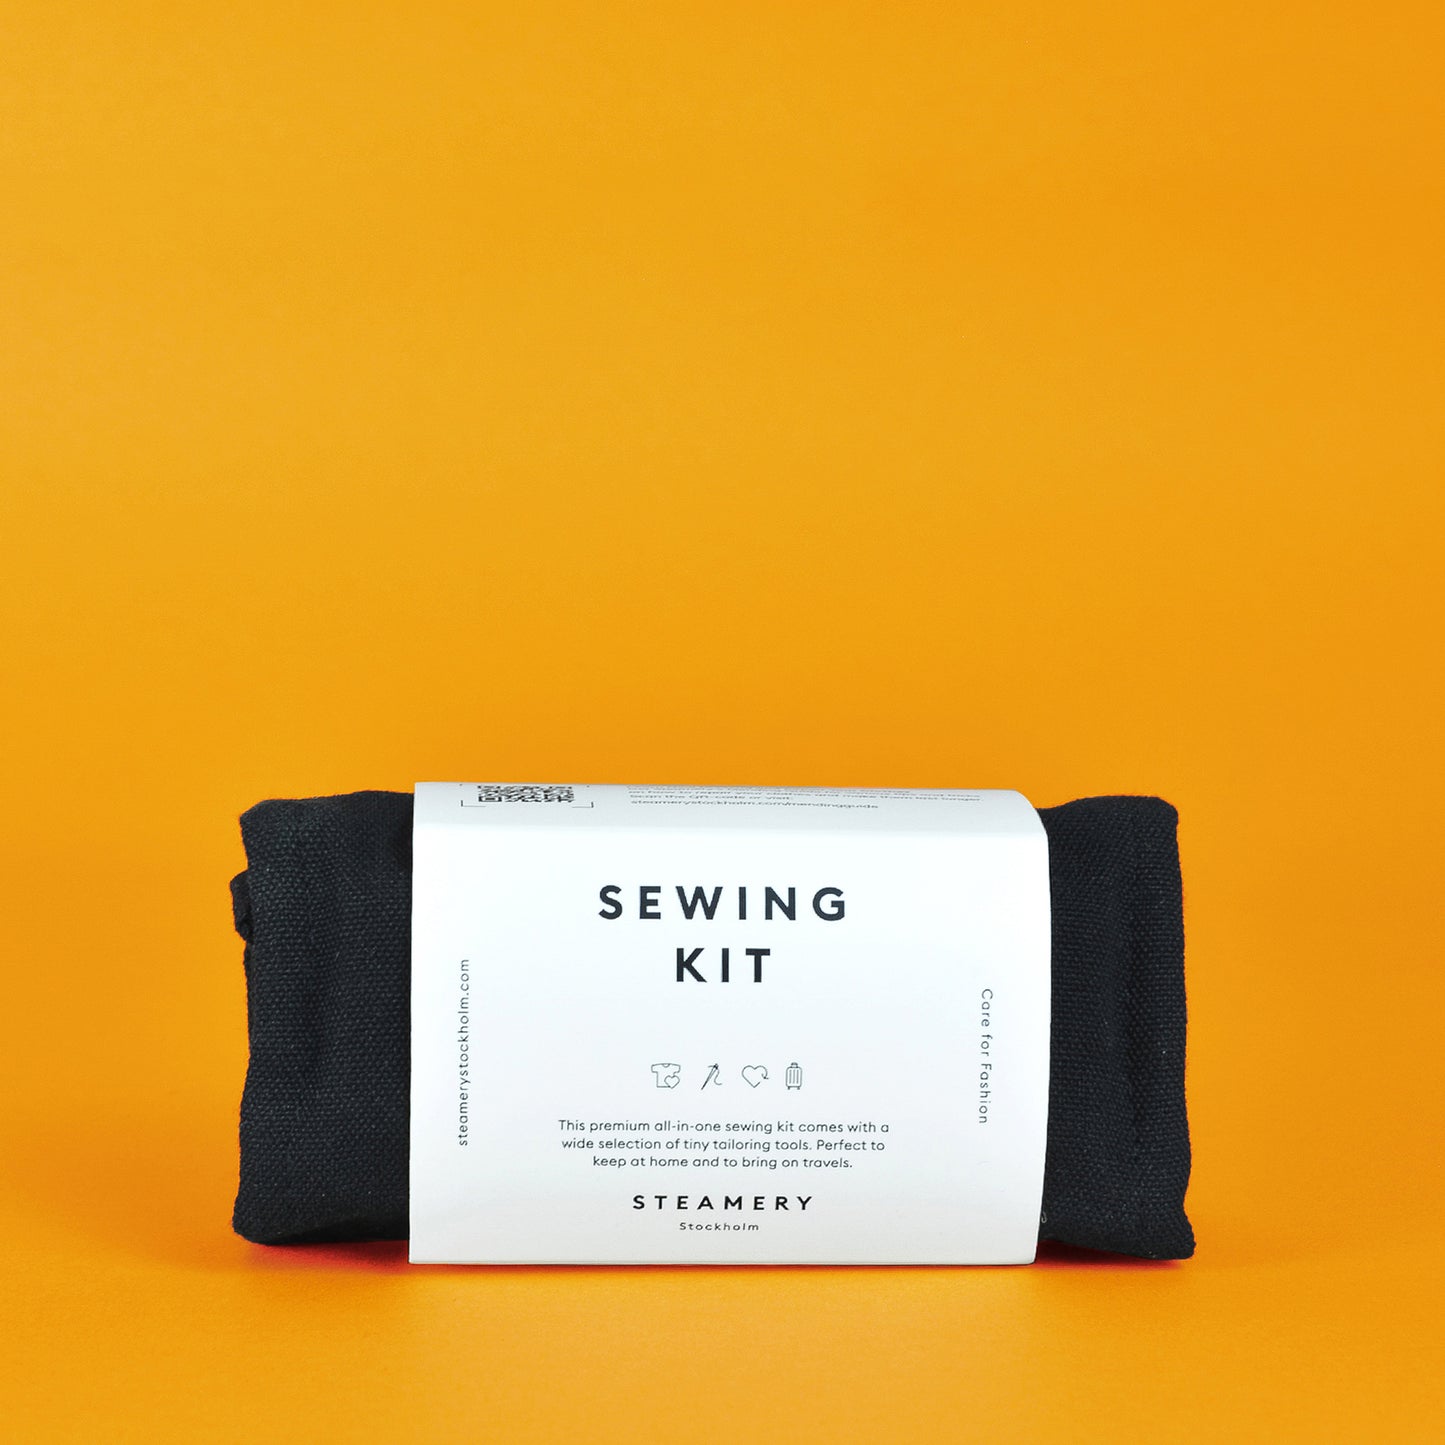 The front of the Steamery sewing kit in a white packaging sleeve